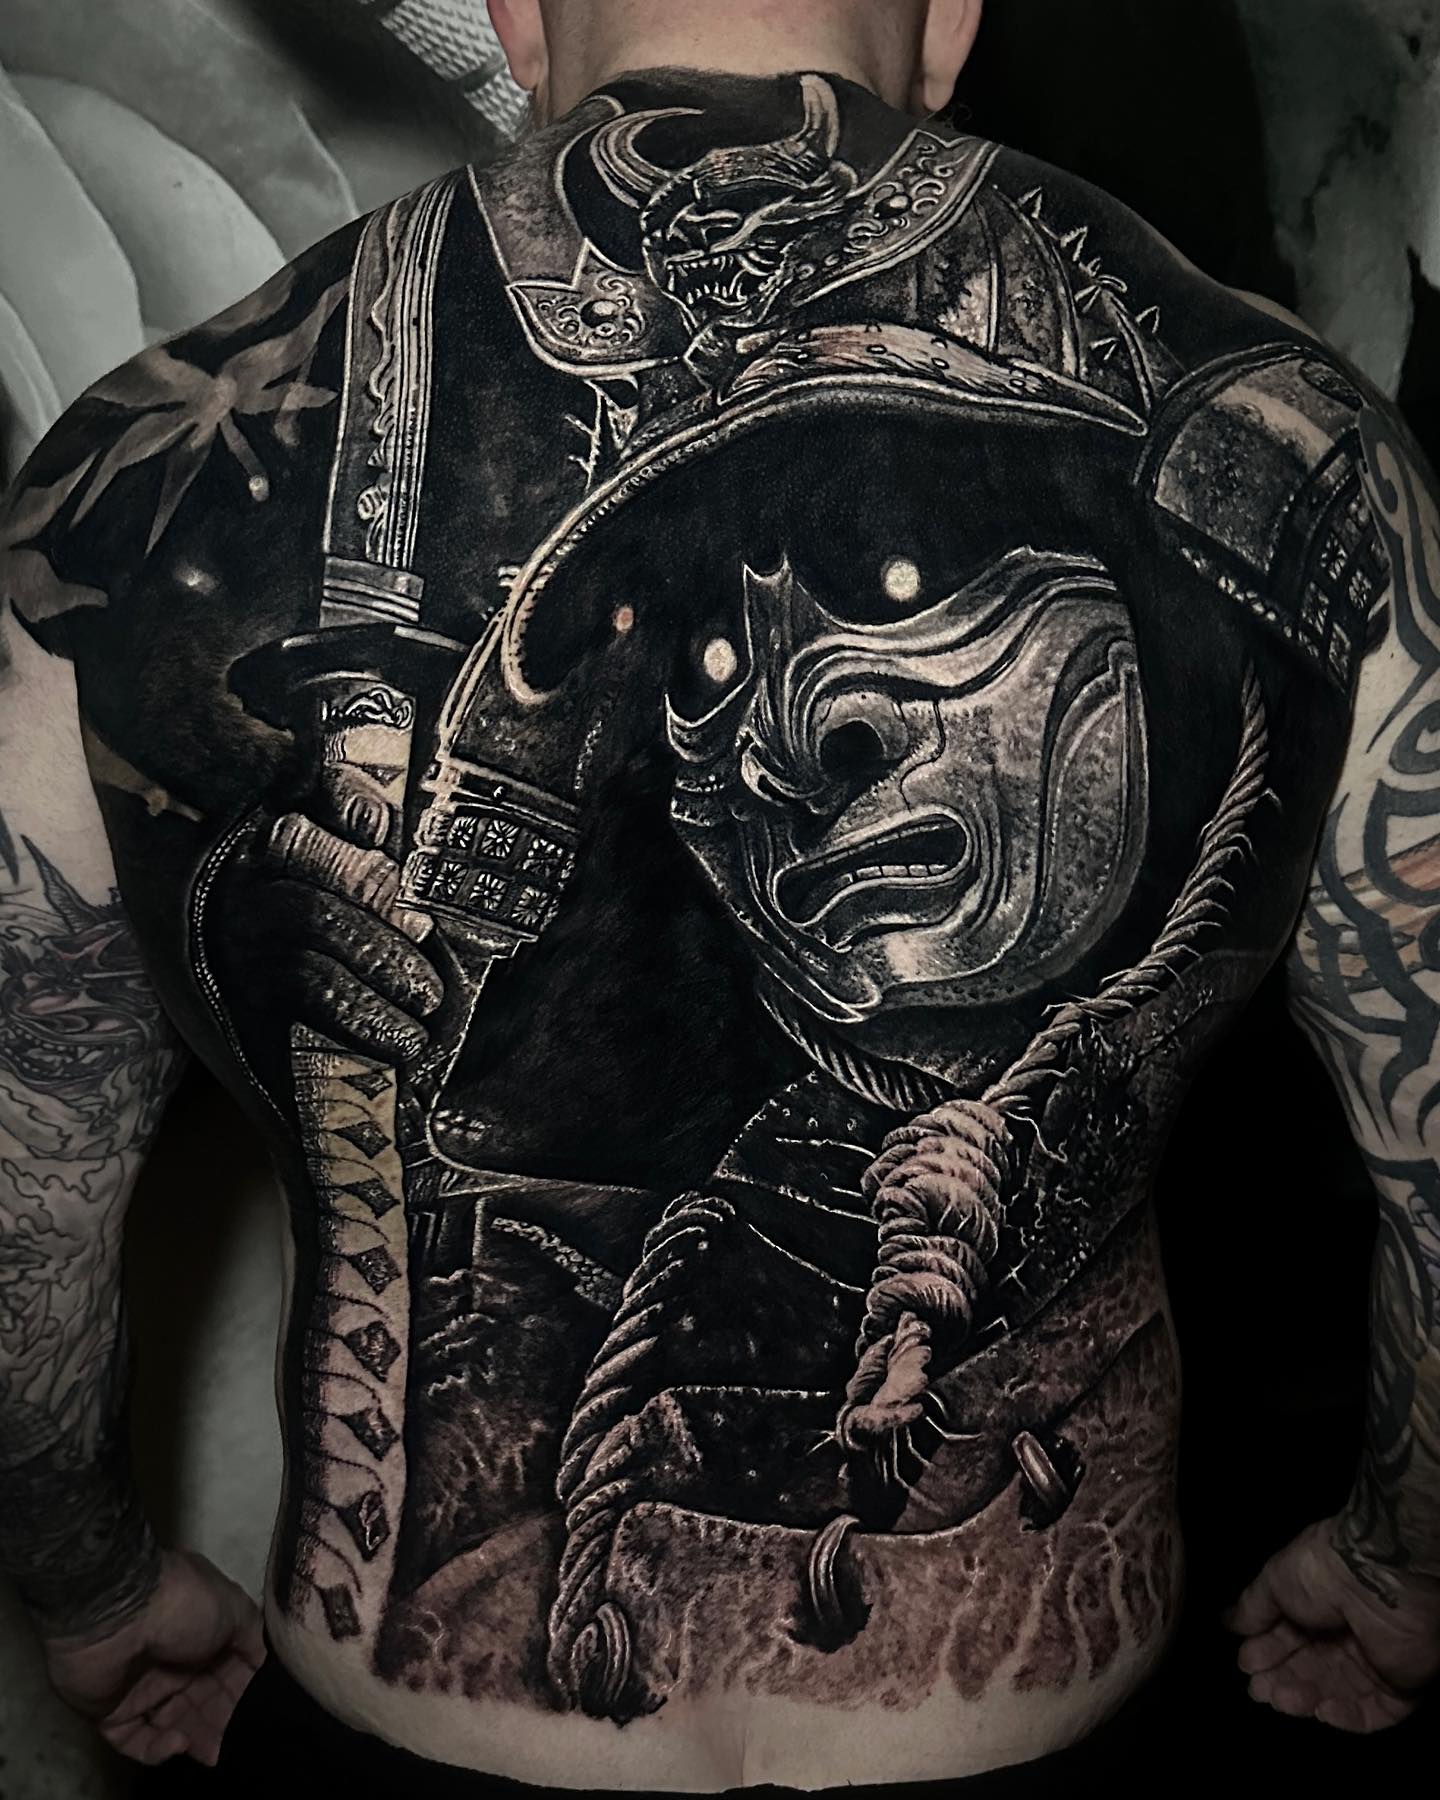 My Blackout Tattoo sleeve: The whole process! 